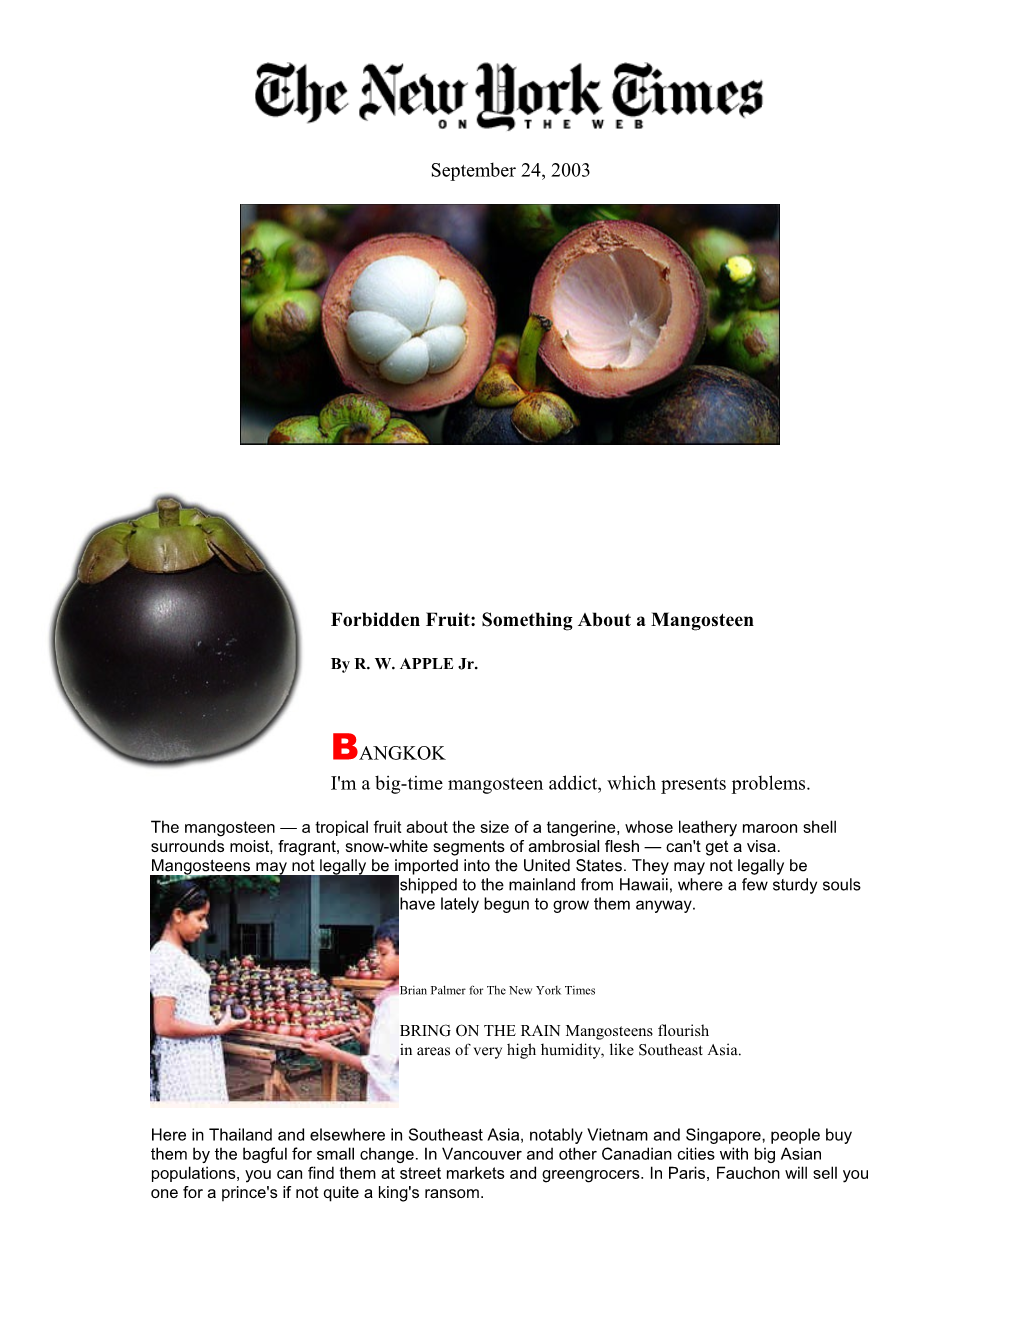 Forbidden Fruit: Something About a Mangosteen